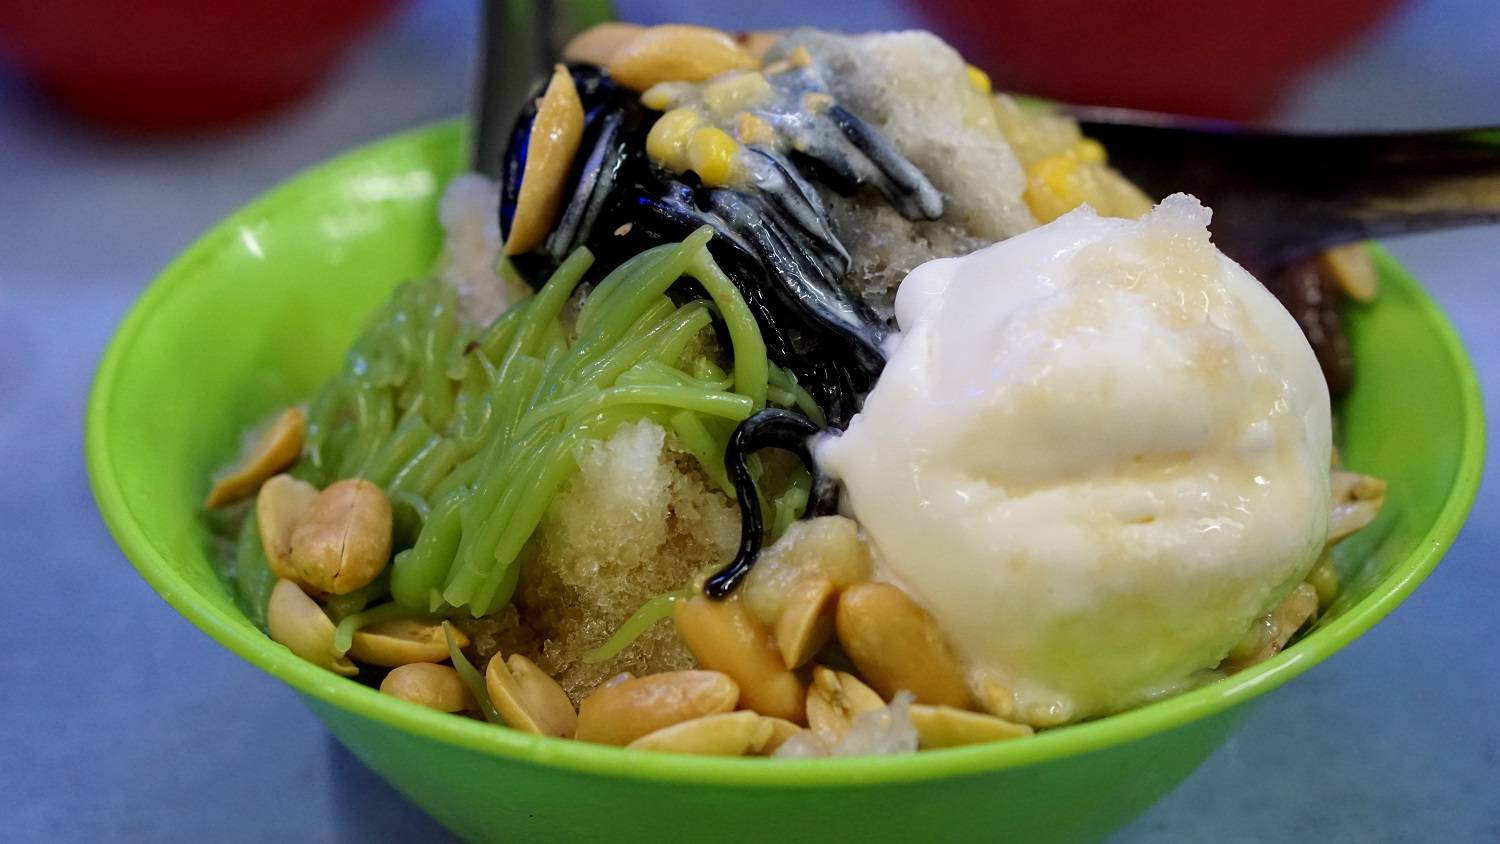 And Ice Kacang for dessert with a scoop of vanilla ice-cream! That’s shaved ice topped with black jelly, cendol (that green stuff which is rice flour strips + pandanus flavour & natural colouring), peanuts, cream corn and kidney beans, drizzled with red syrup, palm sugar, condensed and evaporated milk.... and there might be more ingredients even!